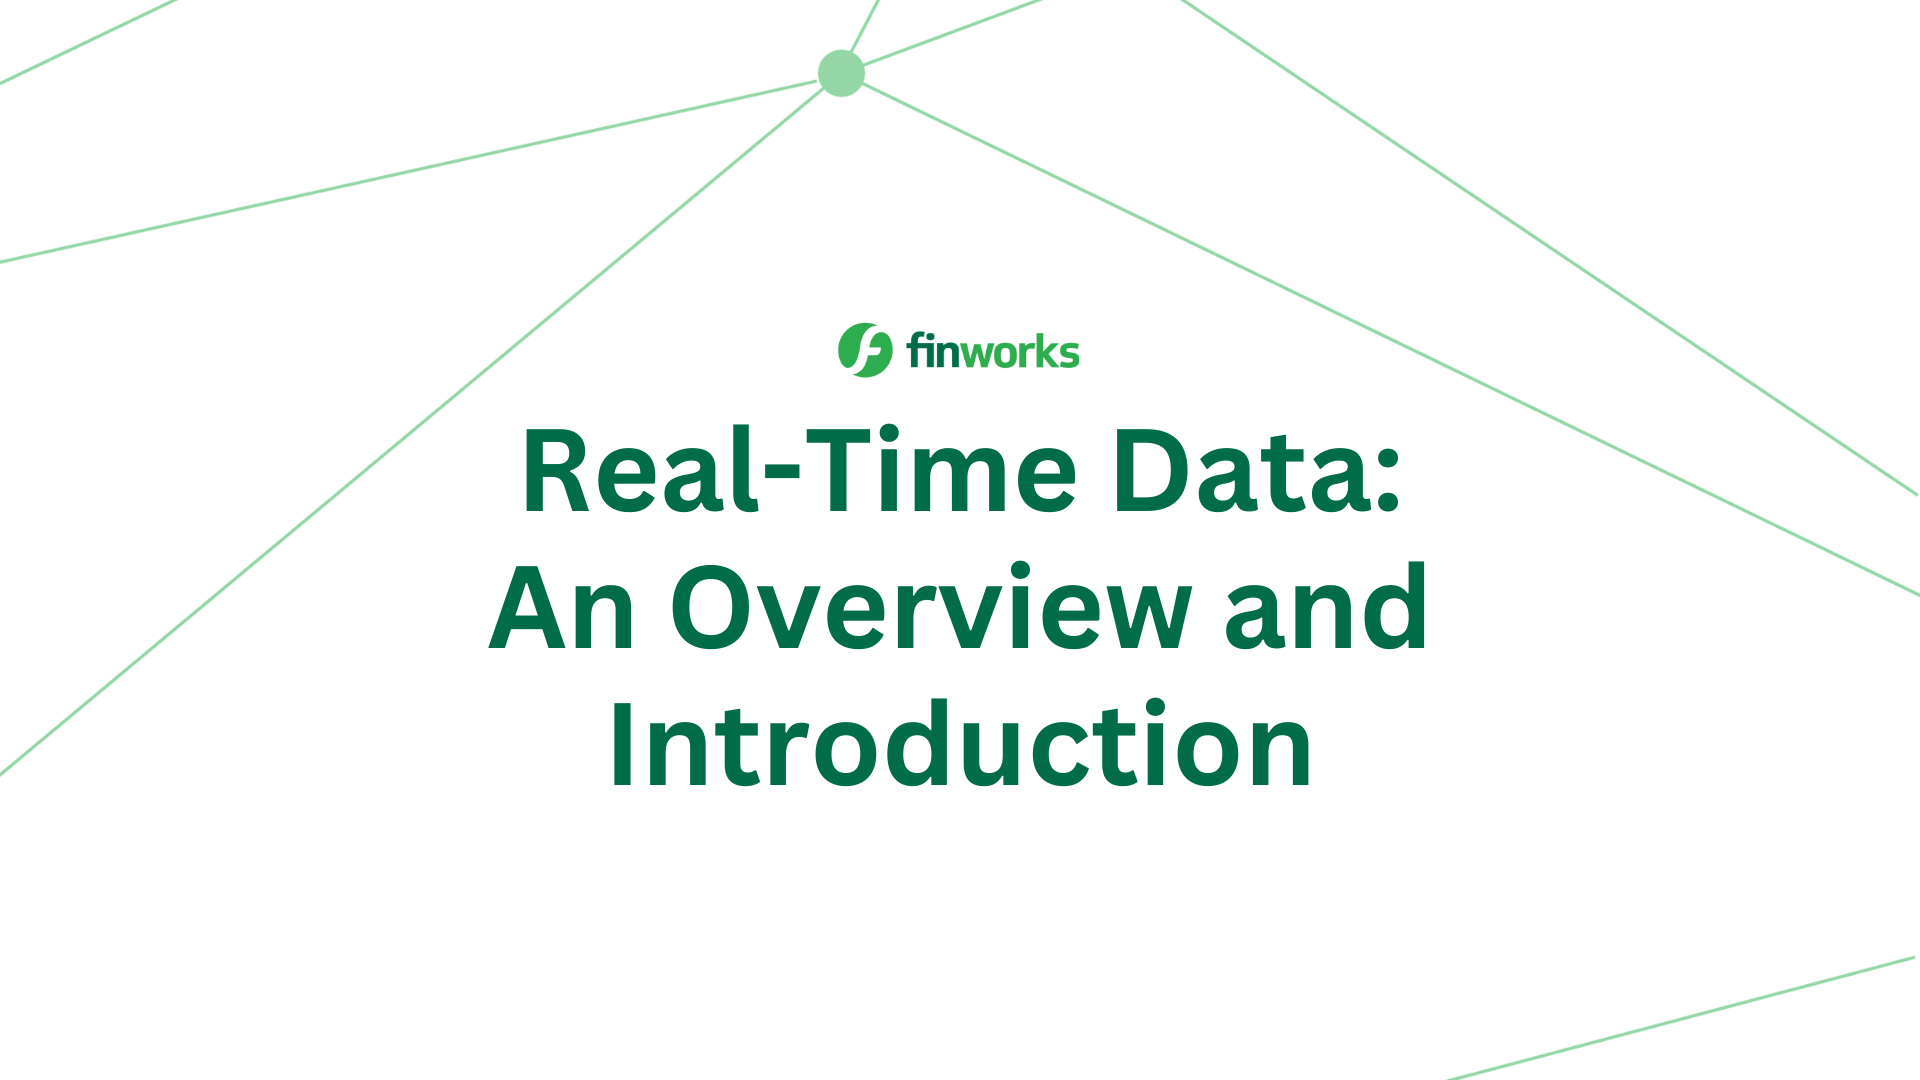 Real-Time Data: An Overview and Introduction